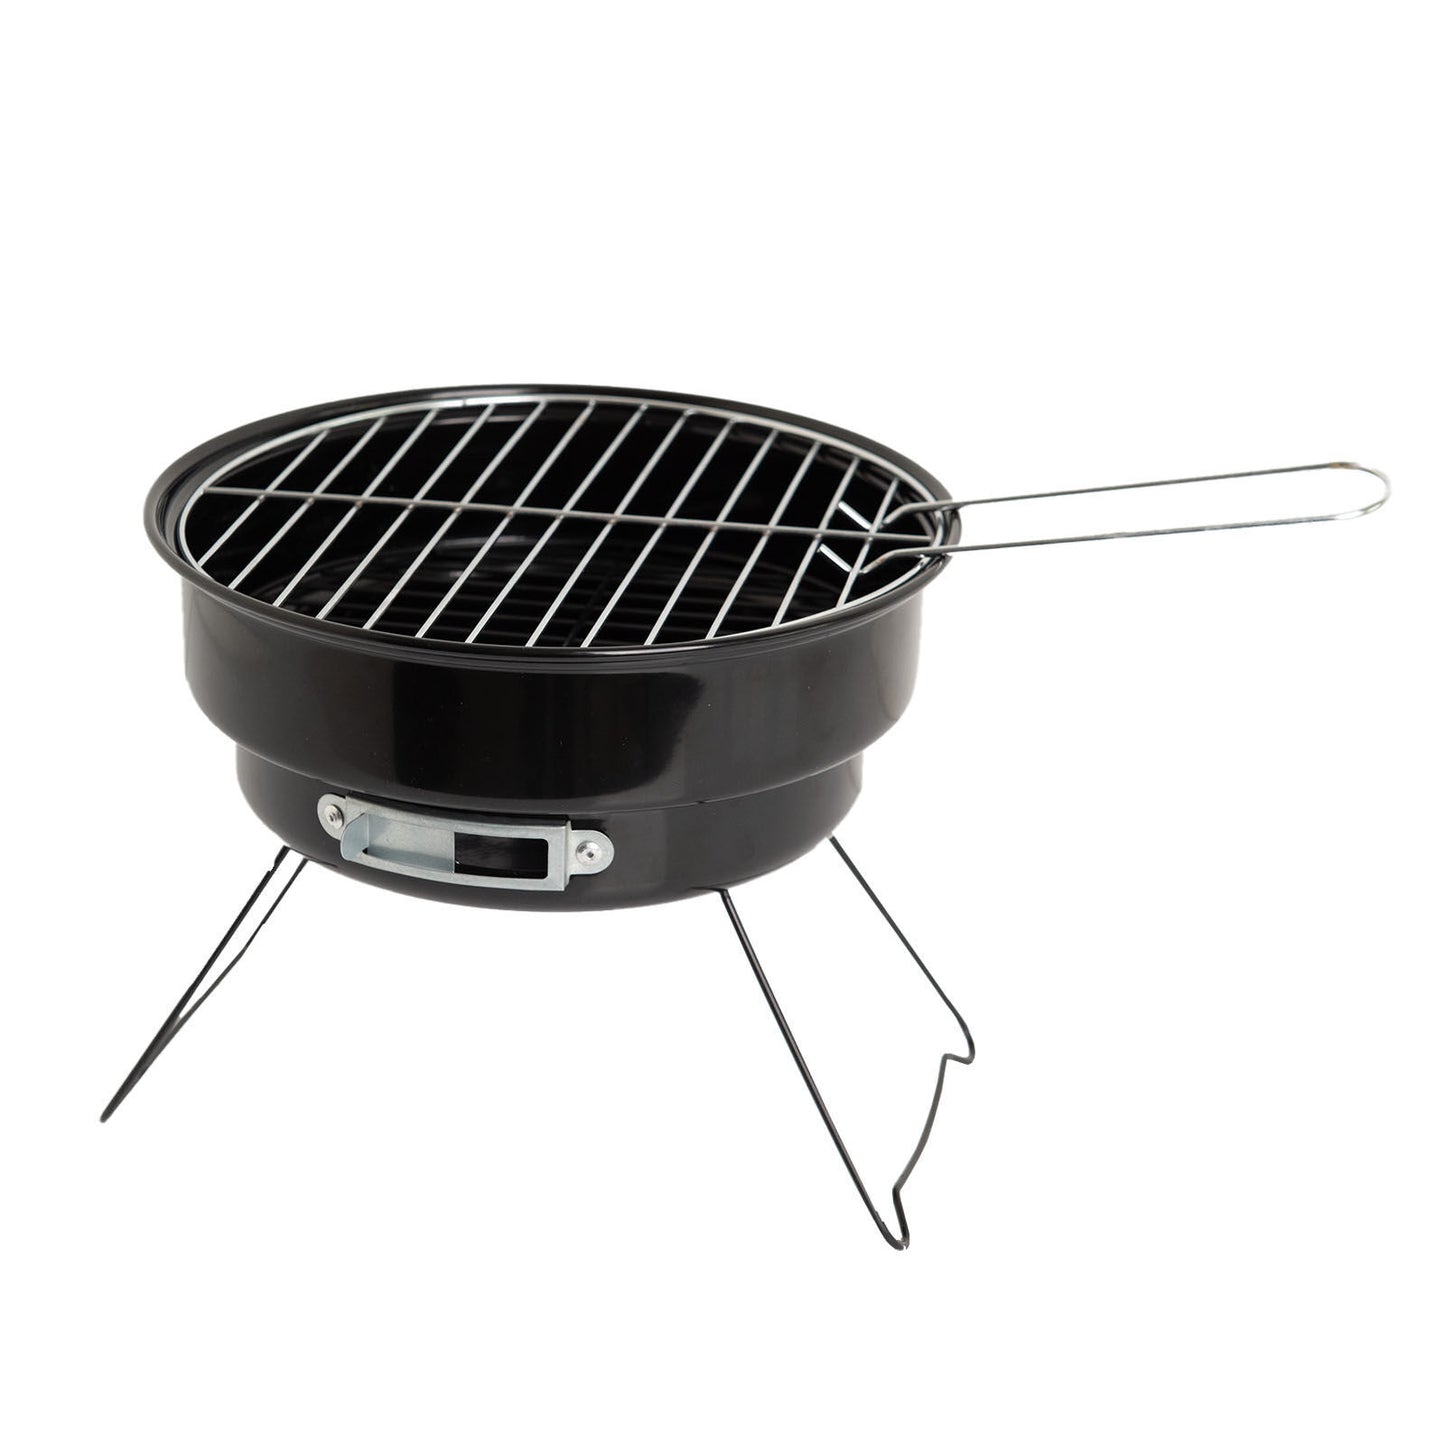 Portable Charcoal BBQ Grill | BBQ with Carry Bag Cooler Set | Havana Outdoors